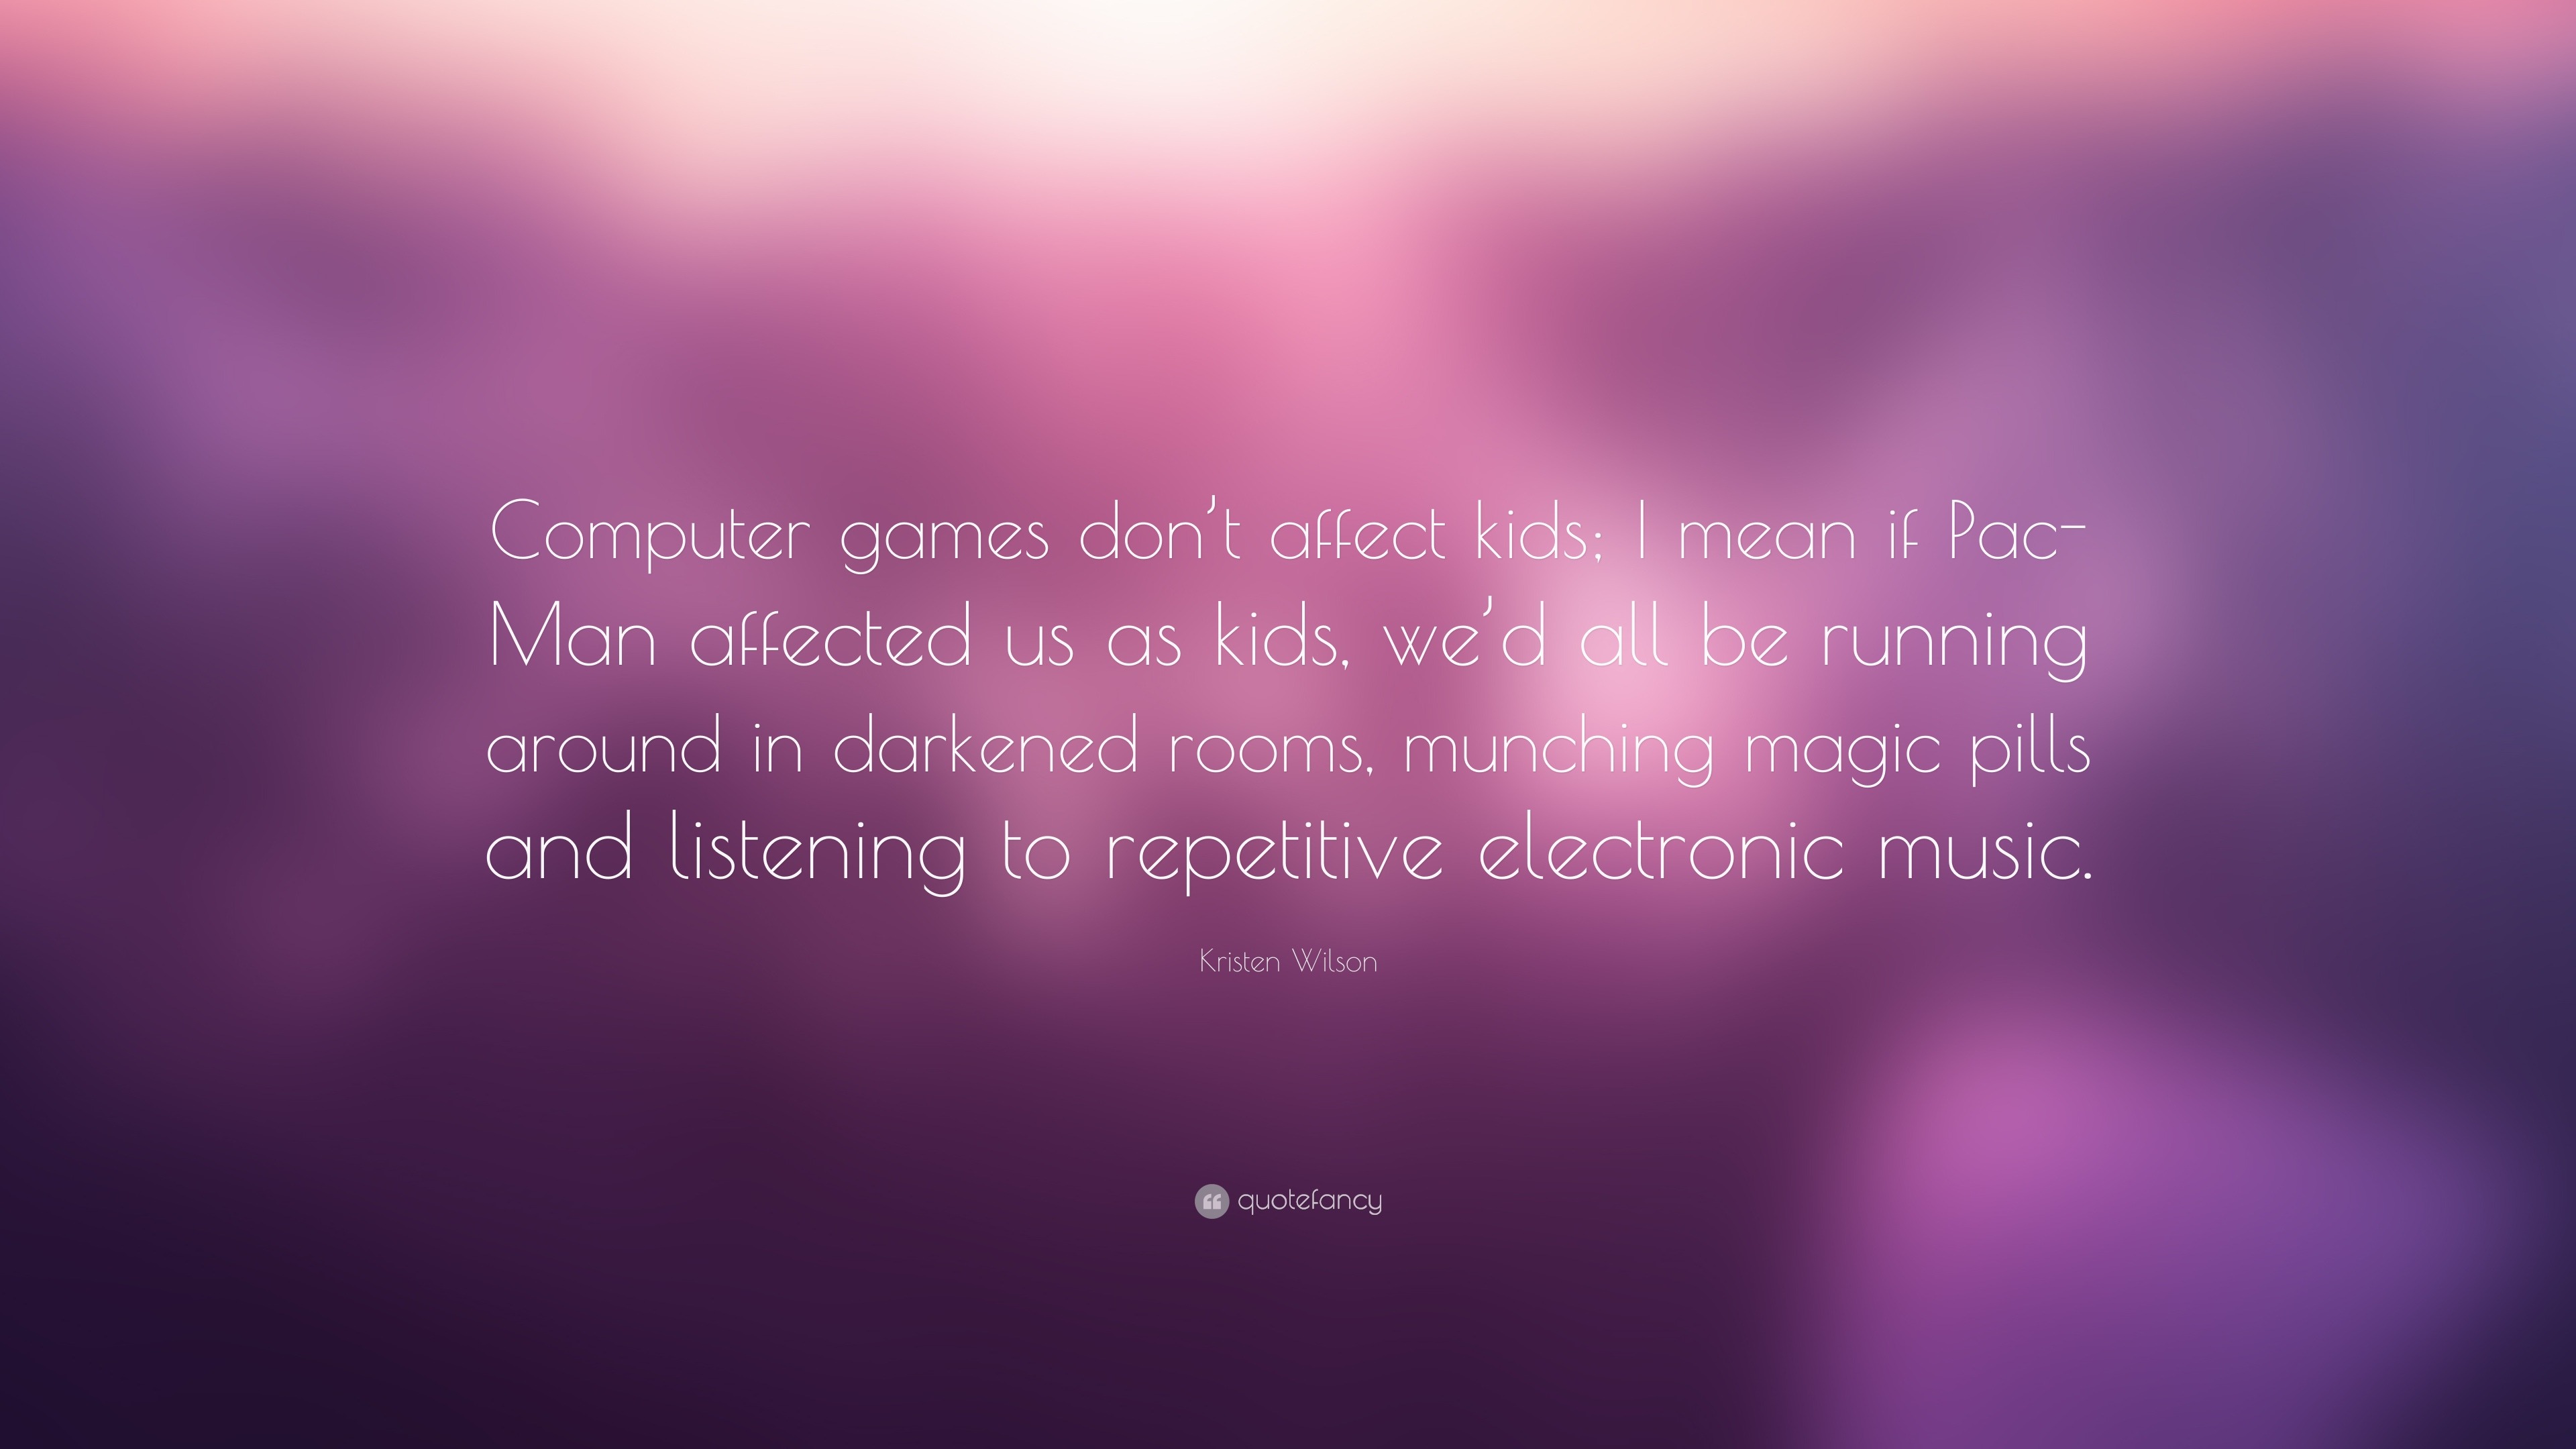 Kristen Wilson Quote: “Computer games don't affect kids; I mean if